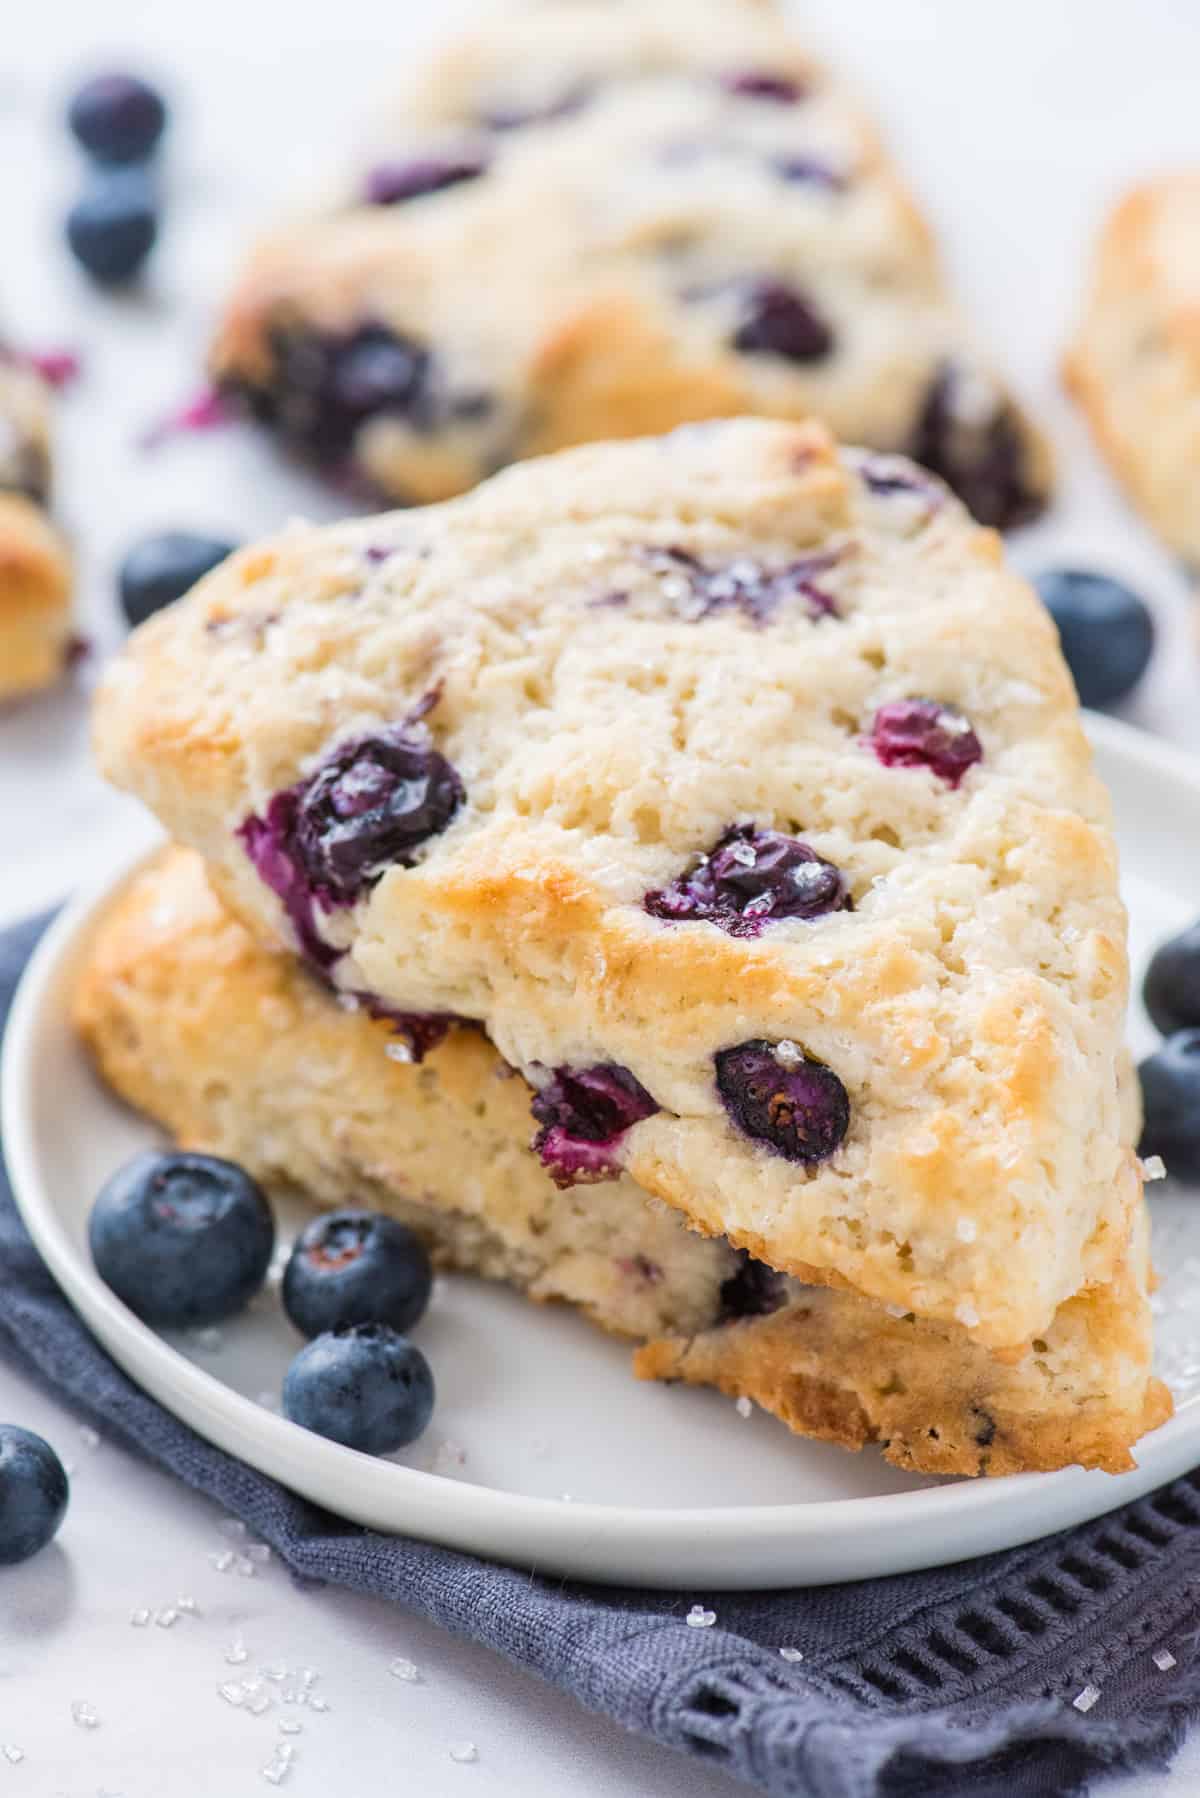 two blueberry scones stacked on each other on white plate with blue napkin